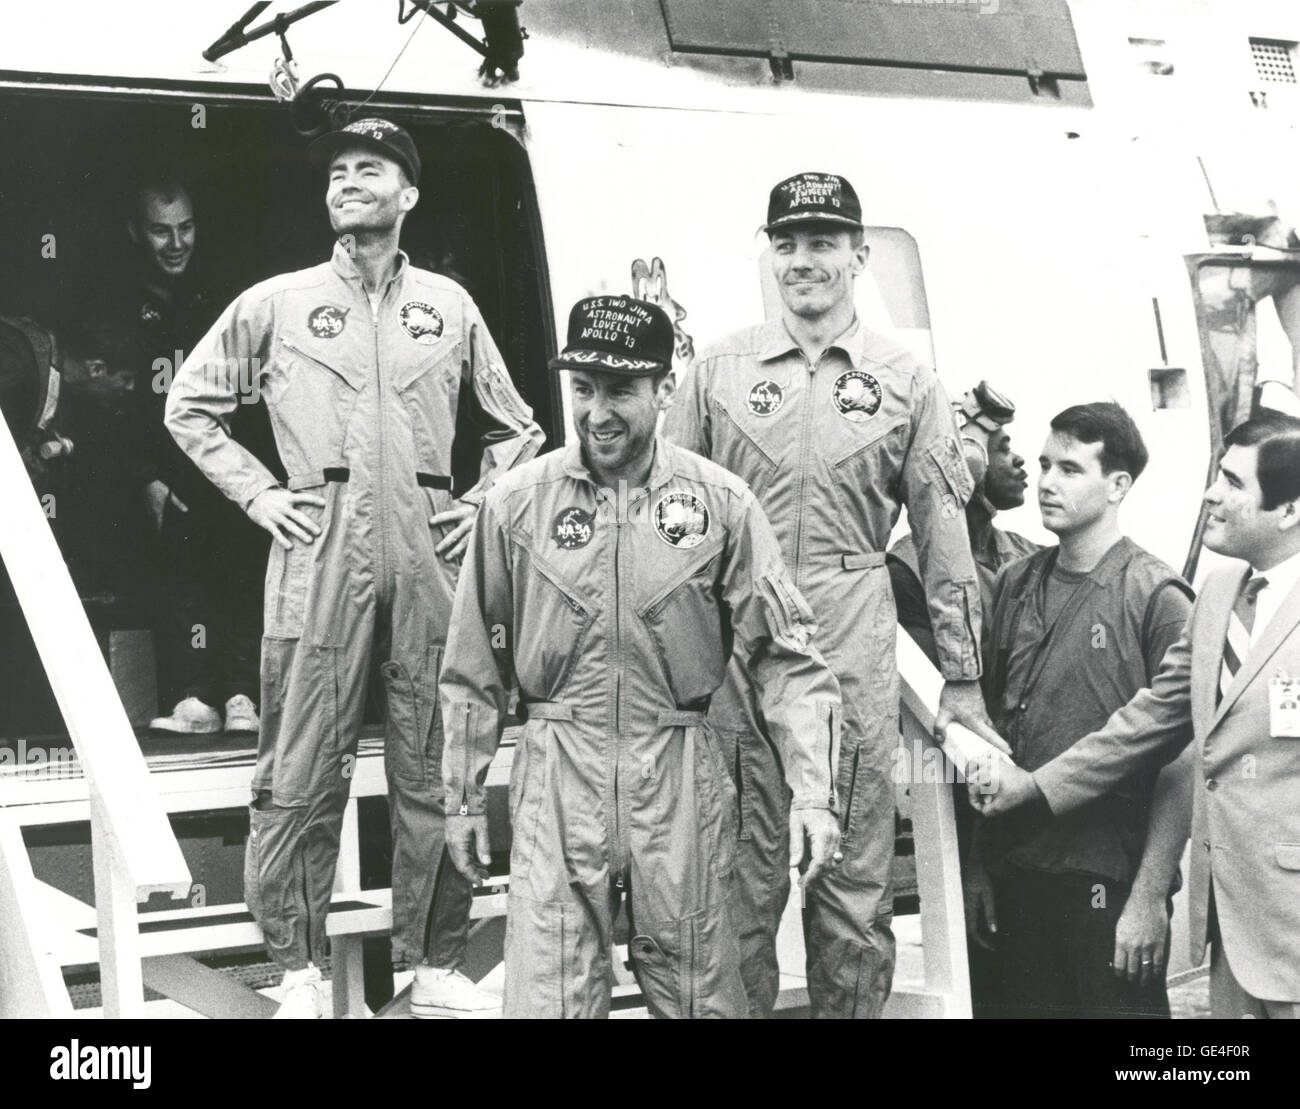 (April 17, 1970) The crew of the Apollo 13 mission step aboard the U.S.S. Iwo Jima, prime recovery ship for the mission, following splashdown and recovery operations in the South Pacific. Exiting the helicopter, which made the pick-up some four miles from the Iwo Jima are (from left) astronauts Fred. W. Haise, Jr., lunar module pilot; James A. Lovell Jr., commander; and John L. Swigert Jr., command module pilot. The Apollo 13 spacecraft splashed down at 12:07:44 pm CST on April 17, 1970.  Image # : 70-H-641 Stock Photo